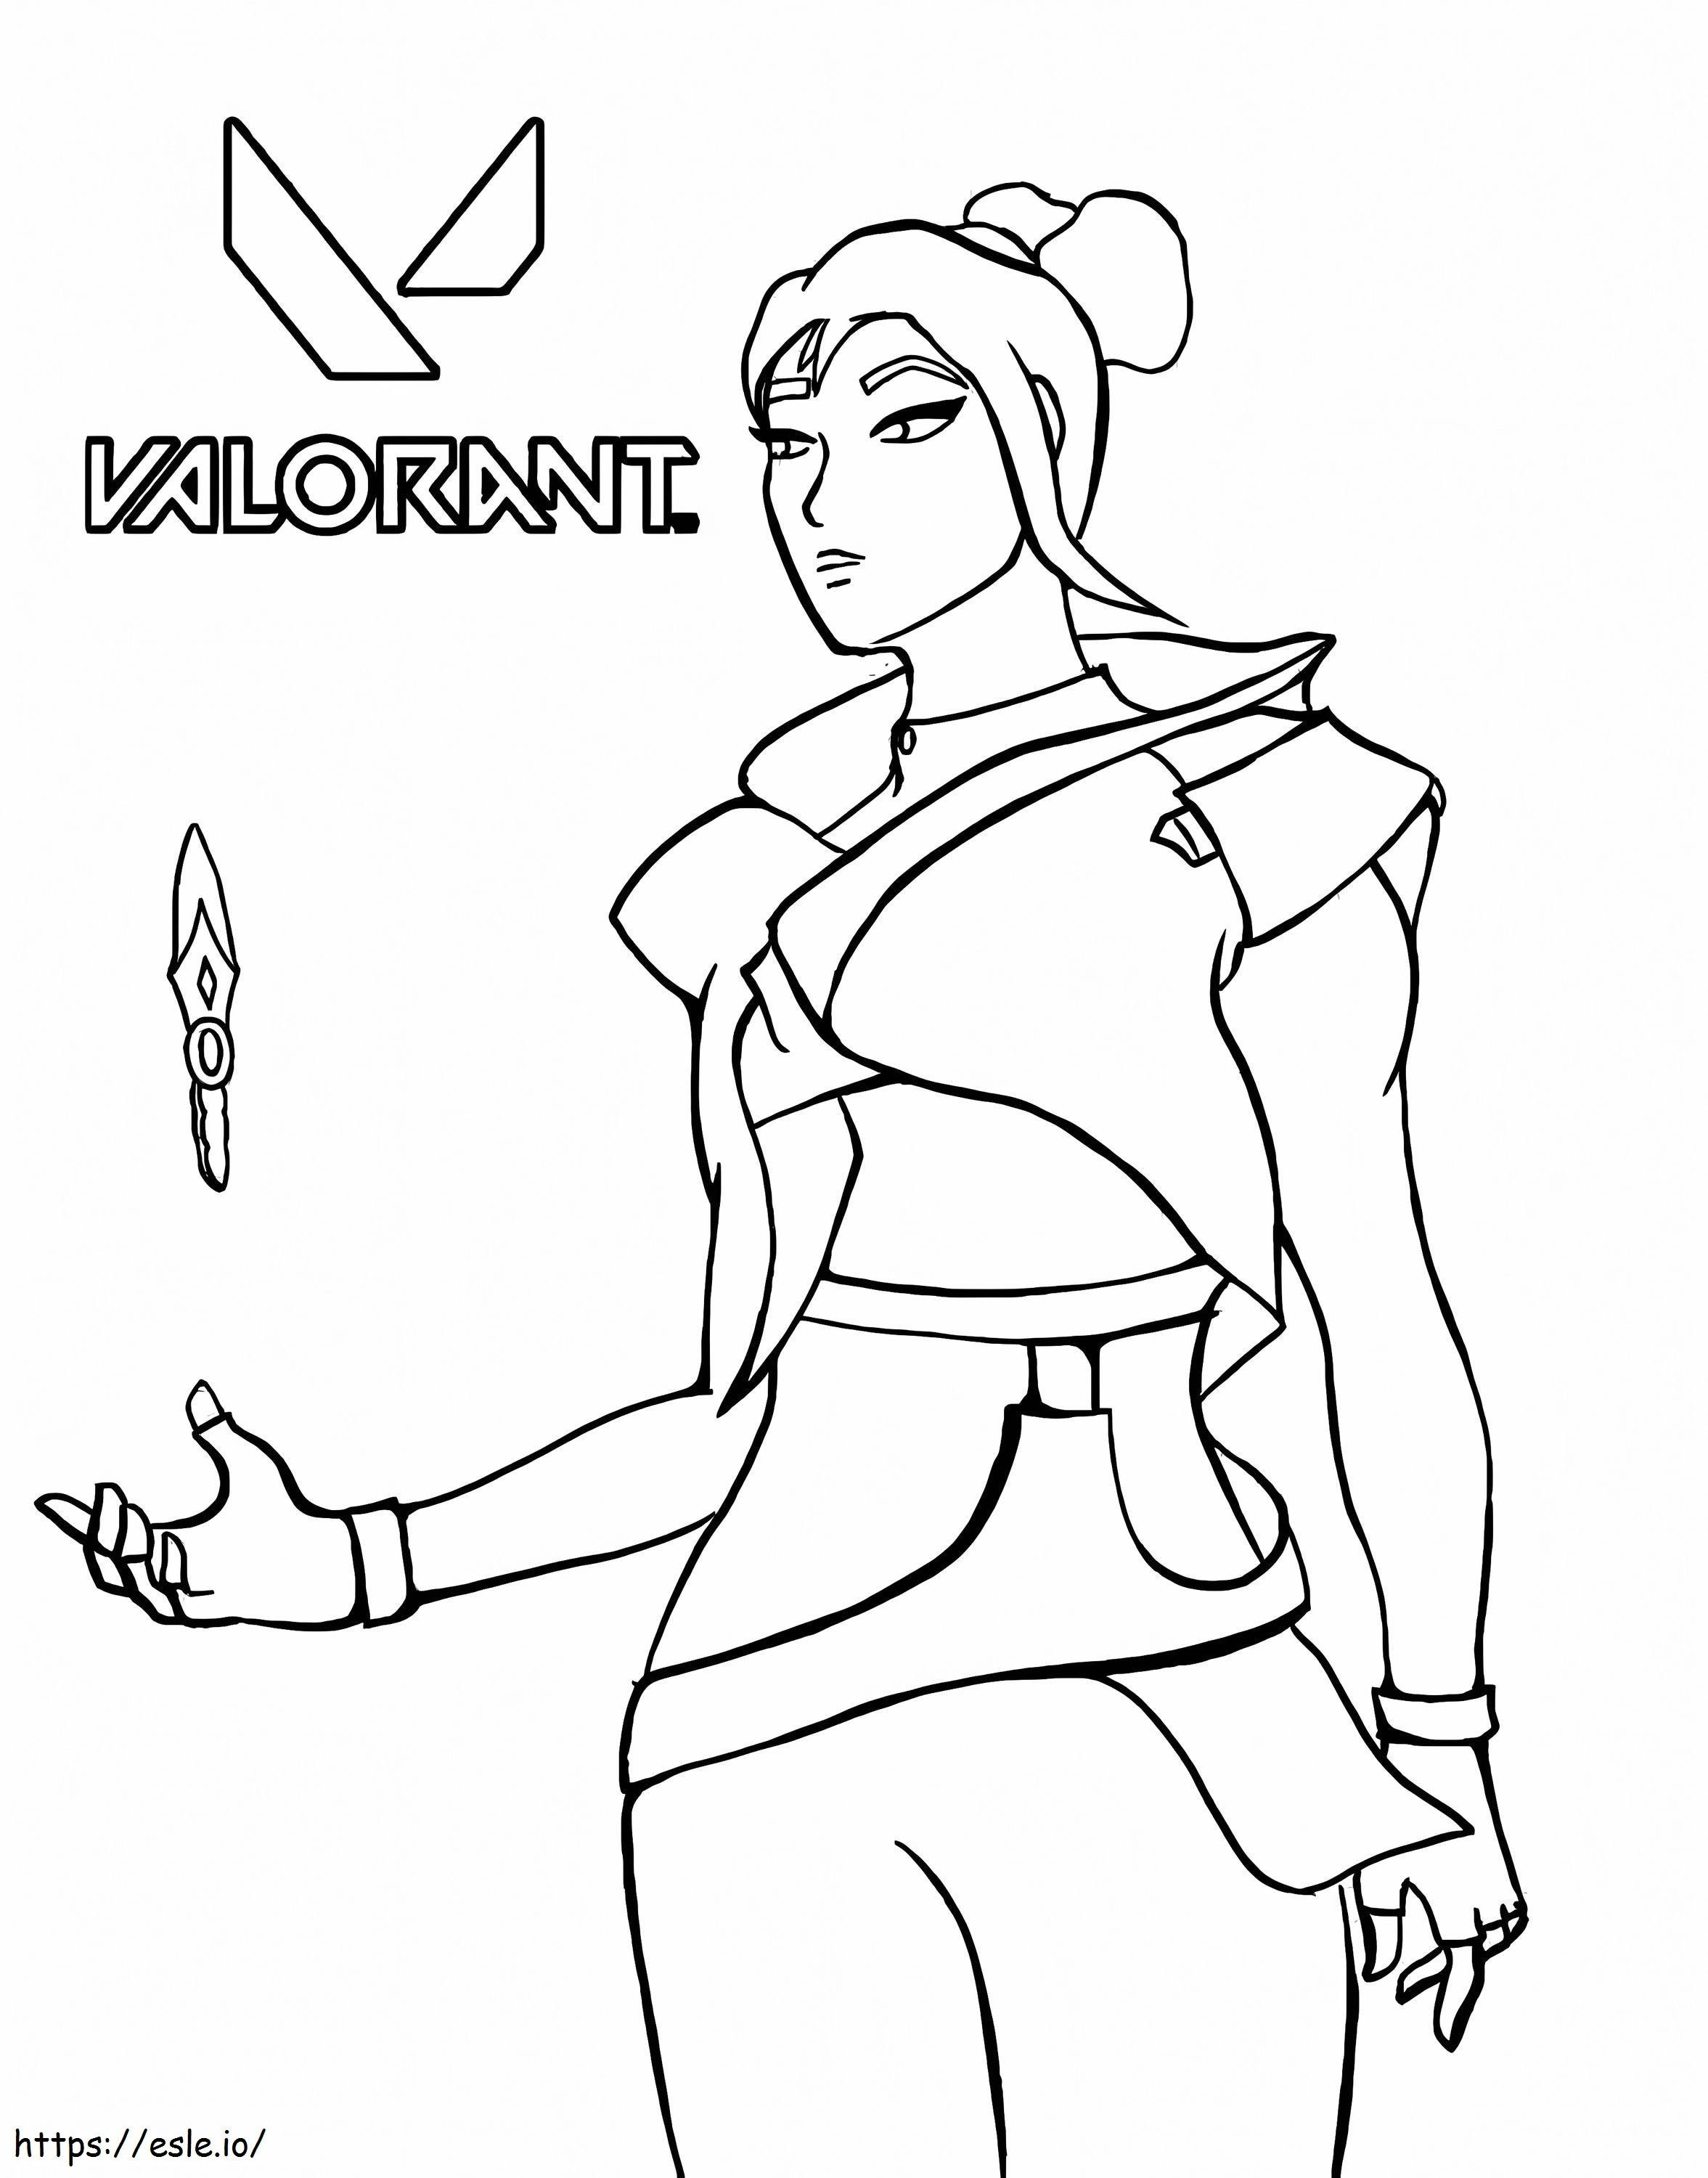 Valorant Jett coloring page